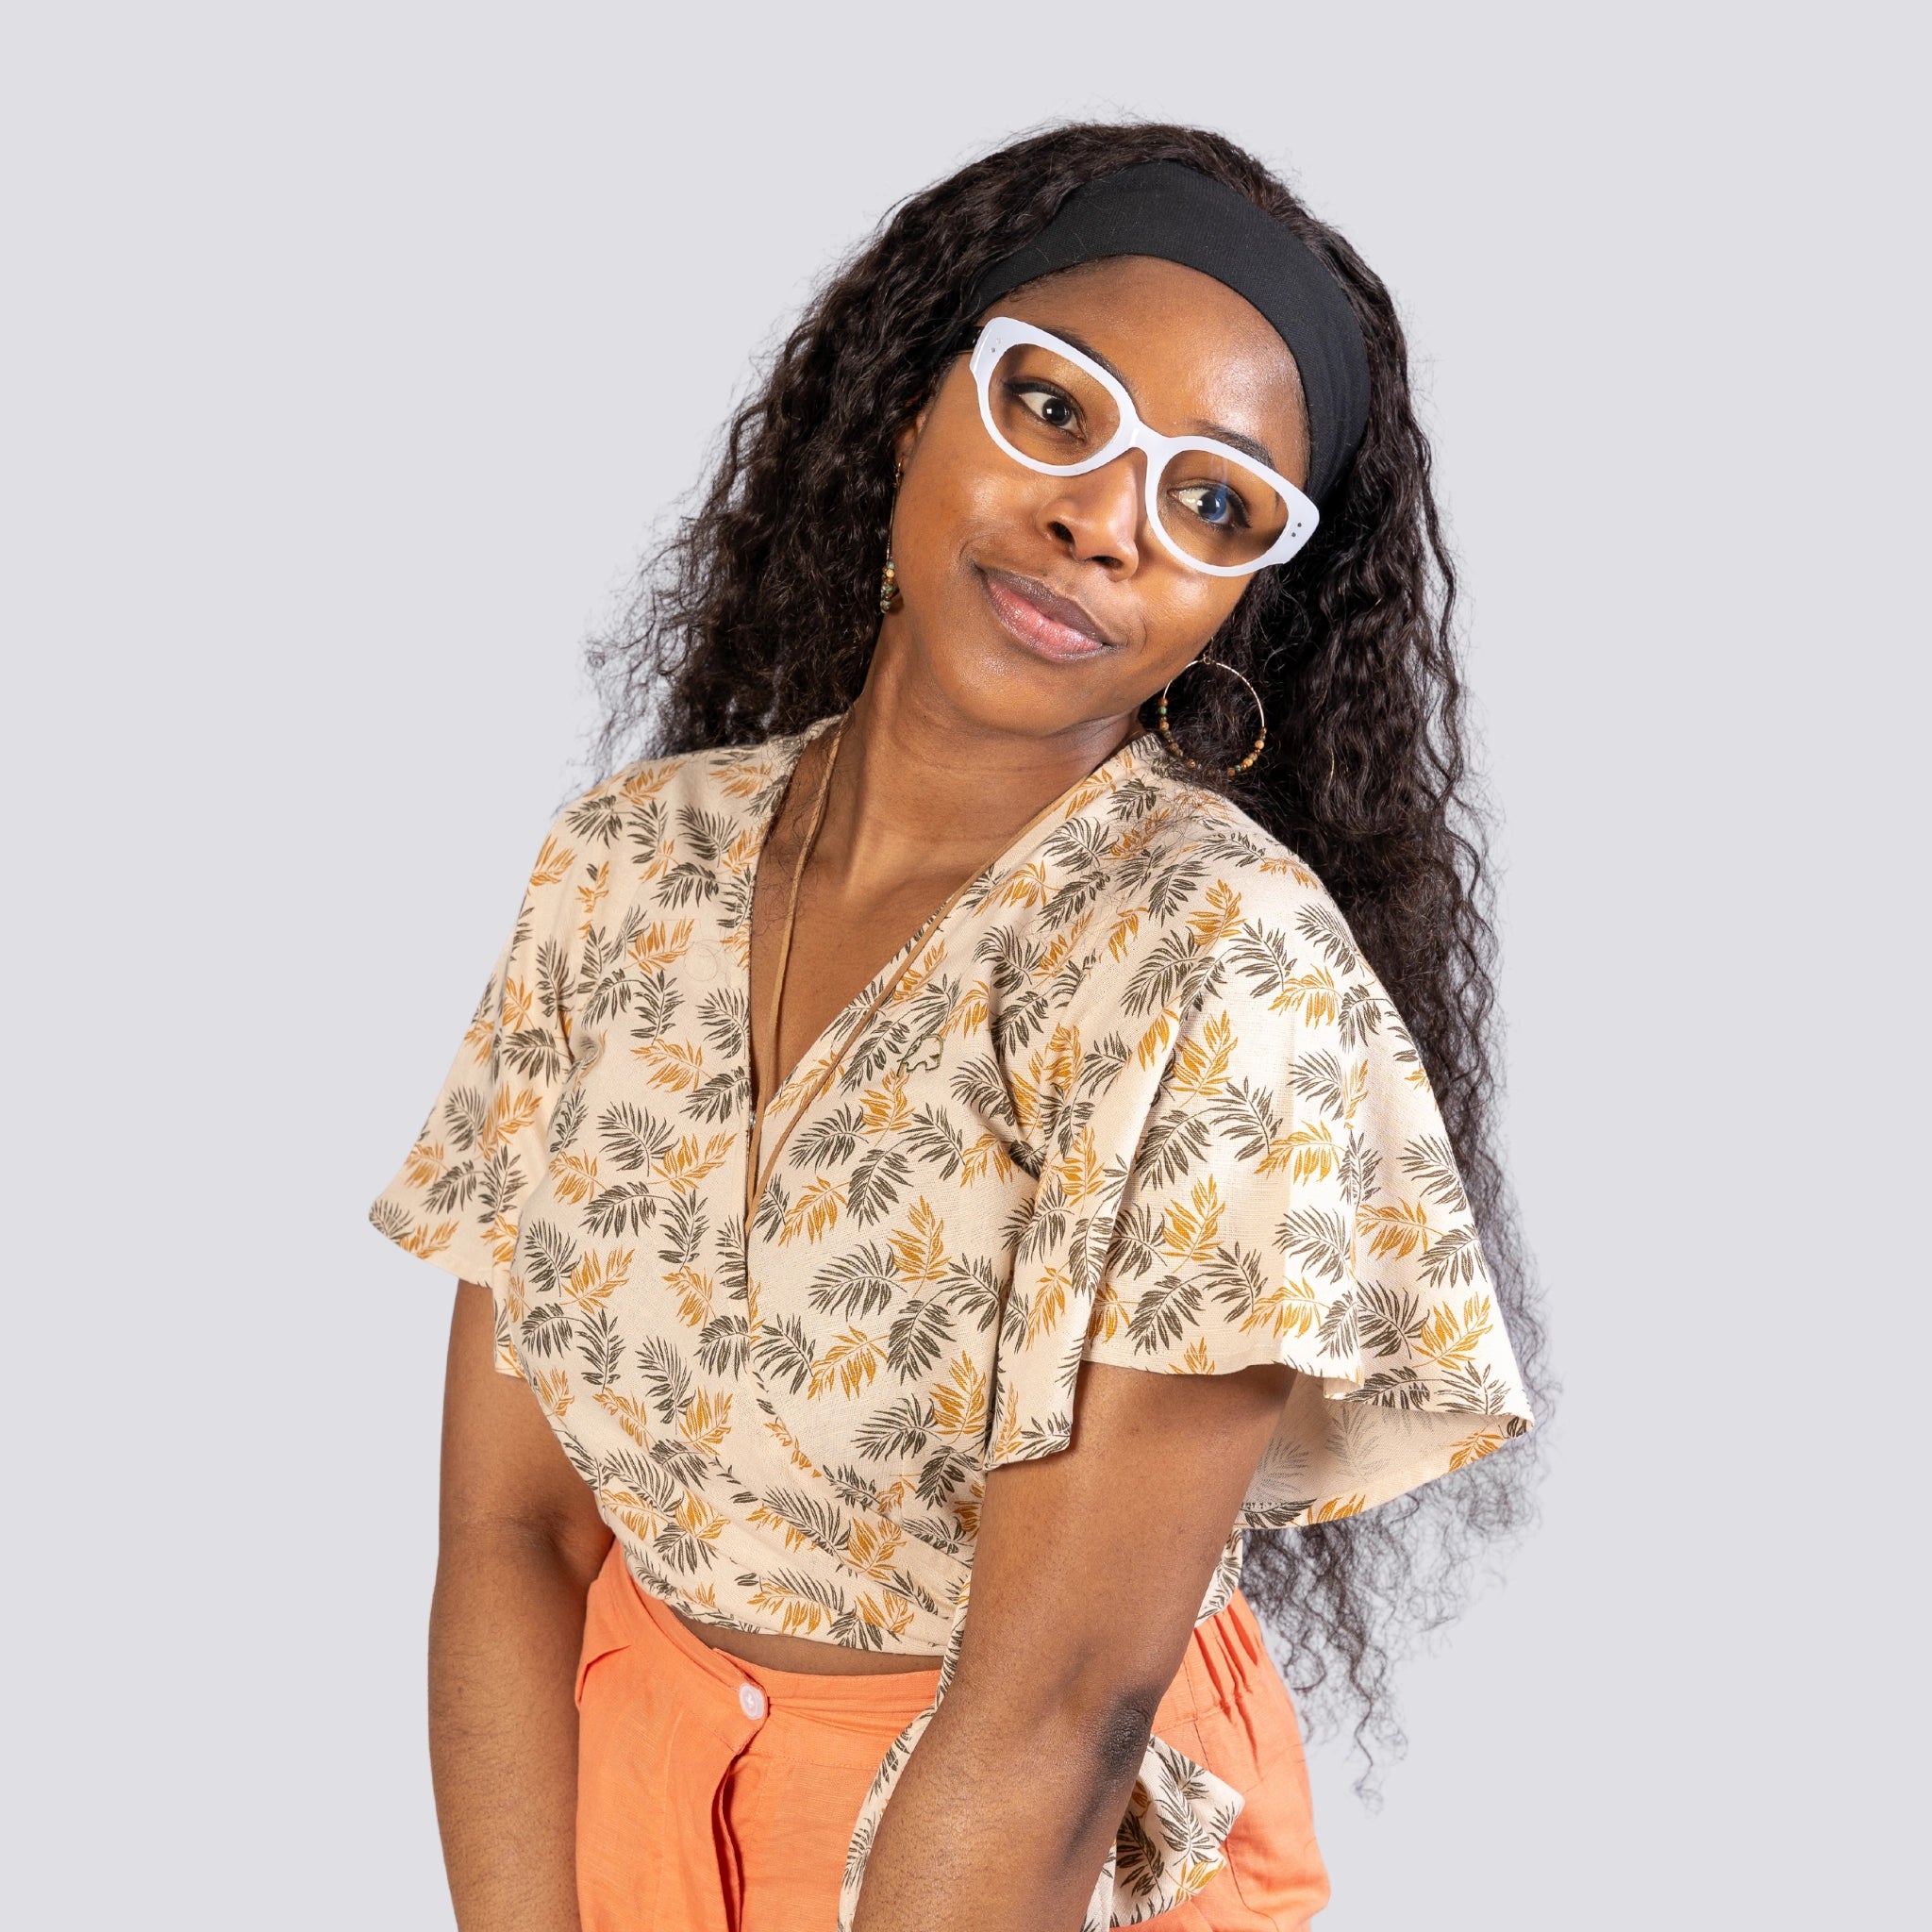 A young woman wearing a ChicPalms Women's Eco-Friendly Wrap Top - Biscuit Bliss by Karee and white sunglasses, paired with an orange skirt, smiles gently against a gray background.